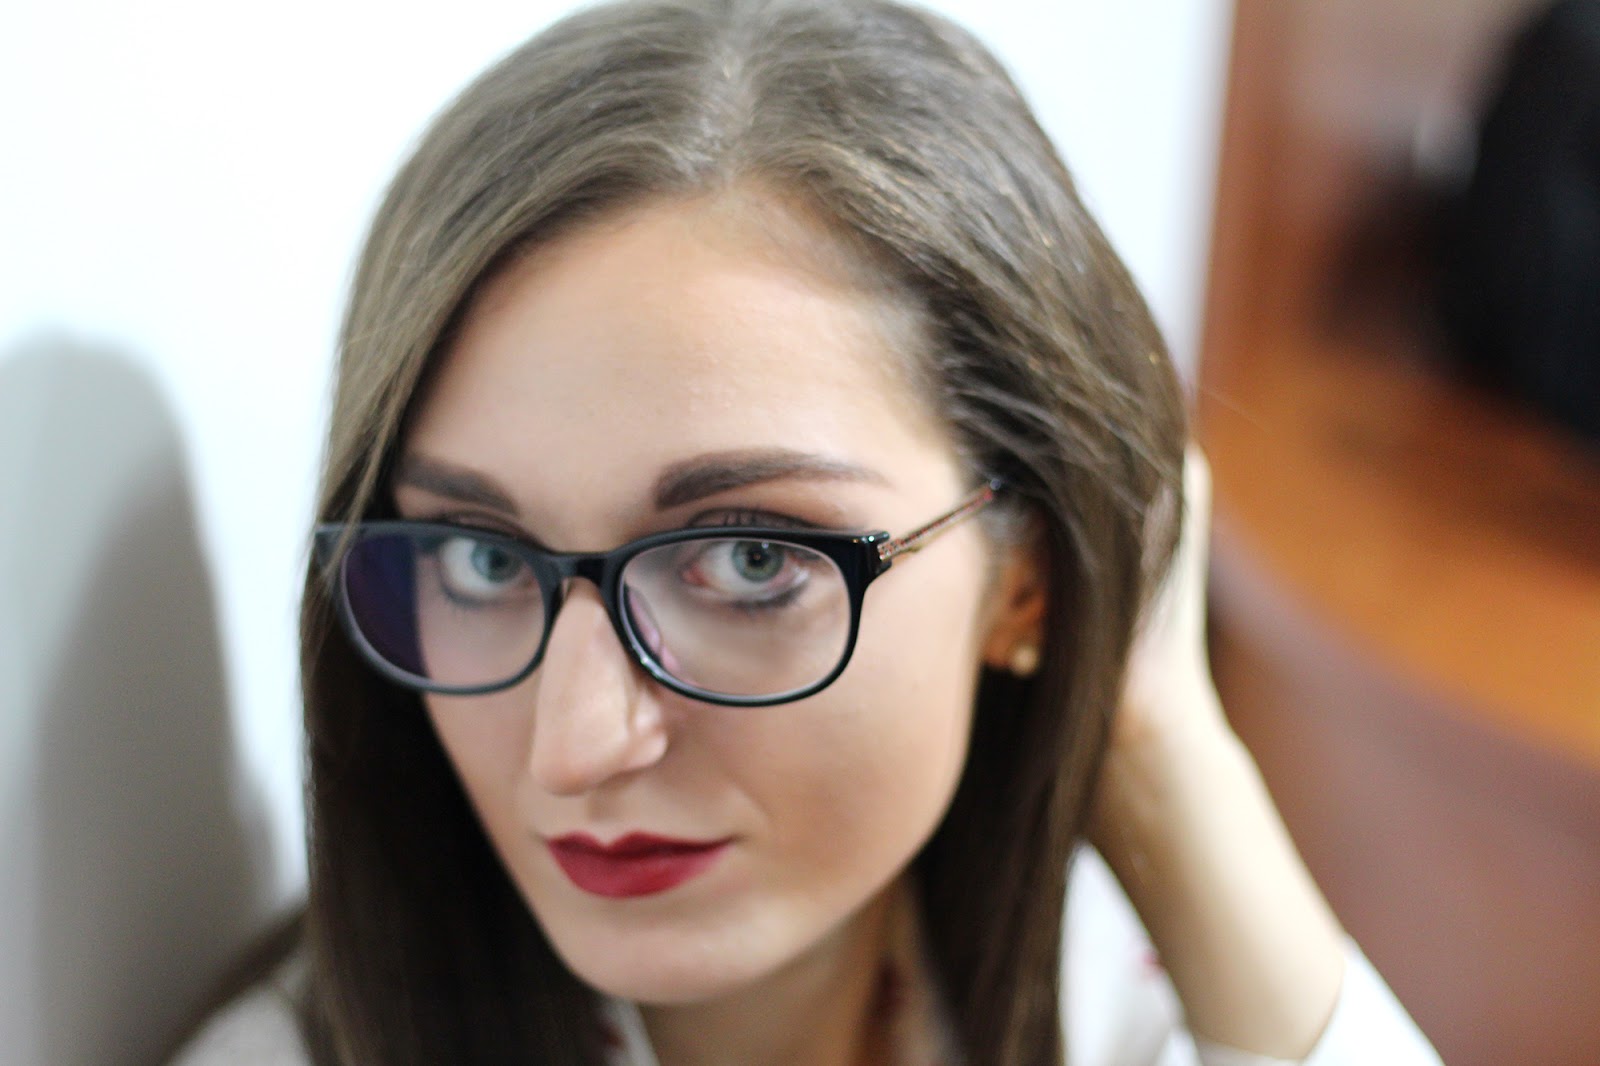 Occhiali Firmoo low cost glasses woman fashion blogger trend nerd girl 